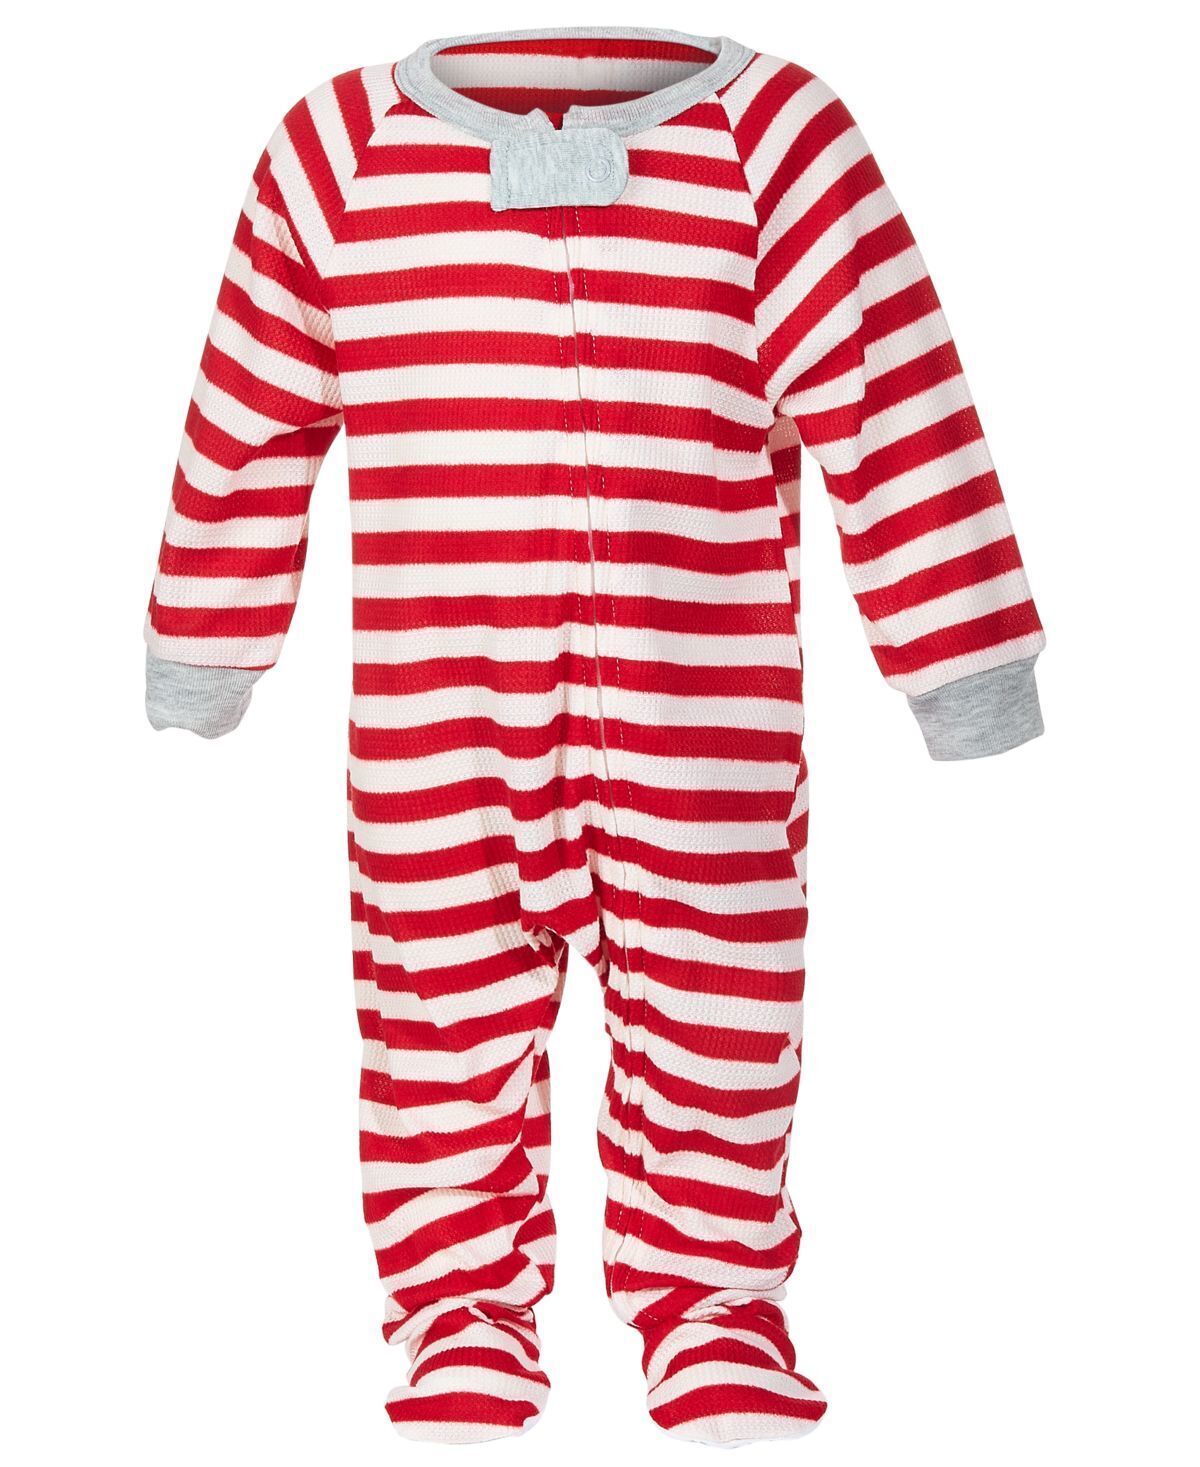 Primary image for allbrand365 designer Baby Matching Striped Footed Pajama Red Stripe Size 24M